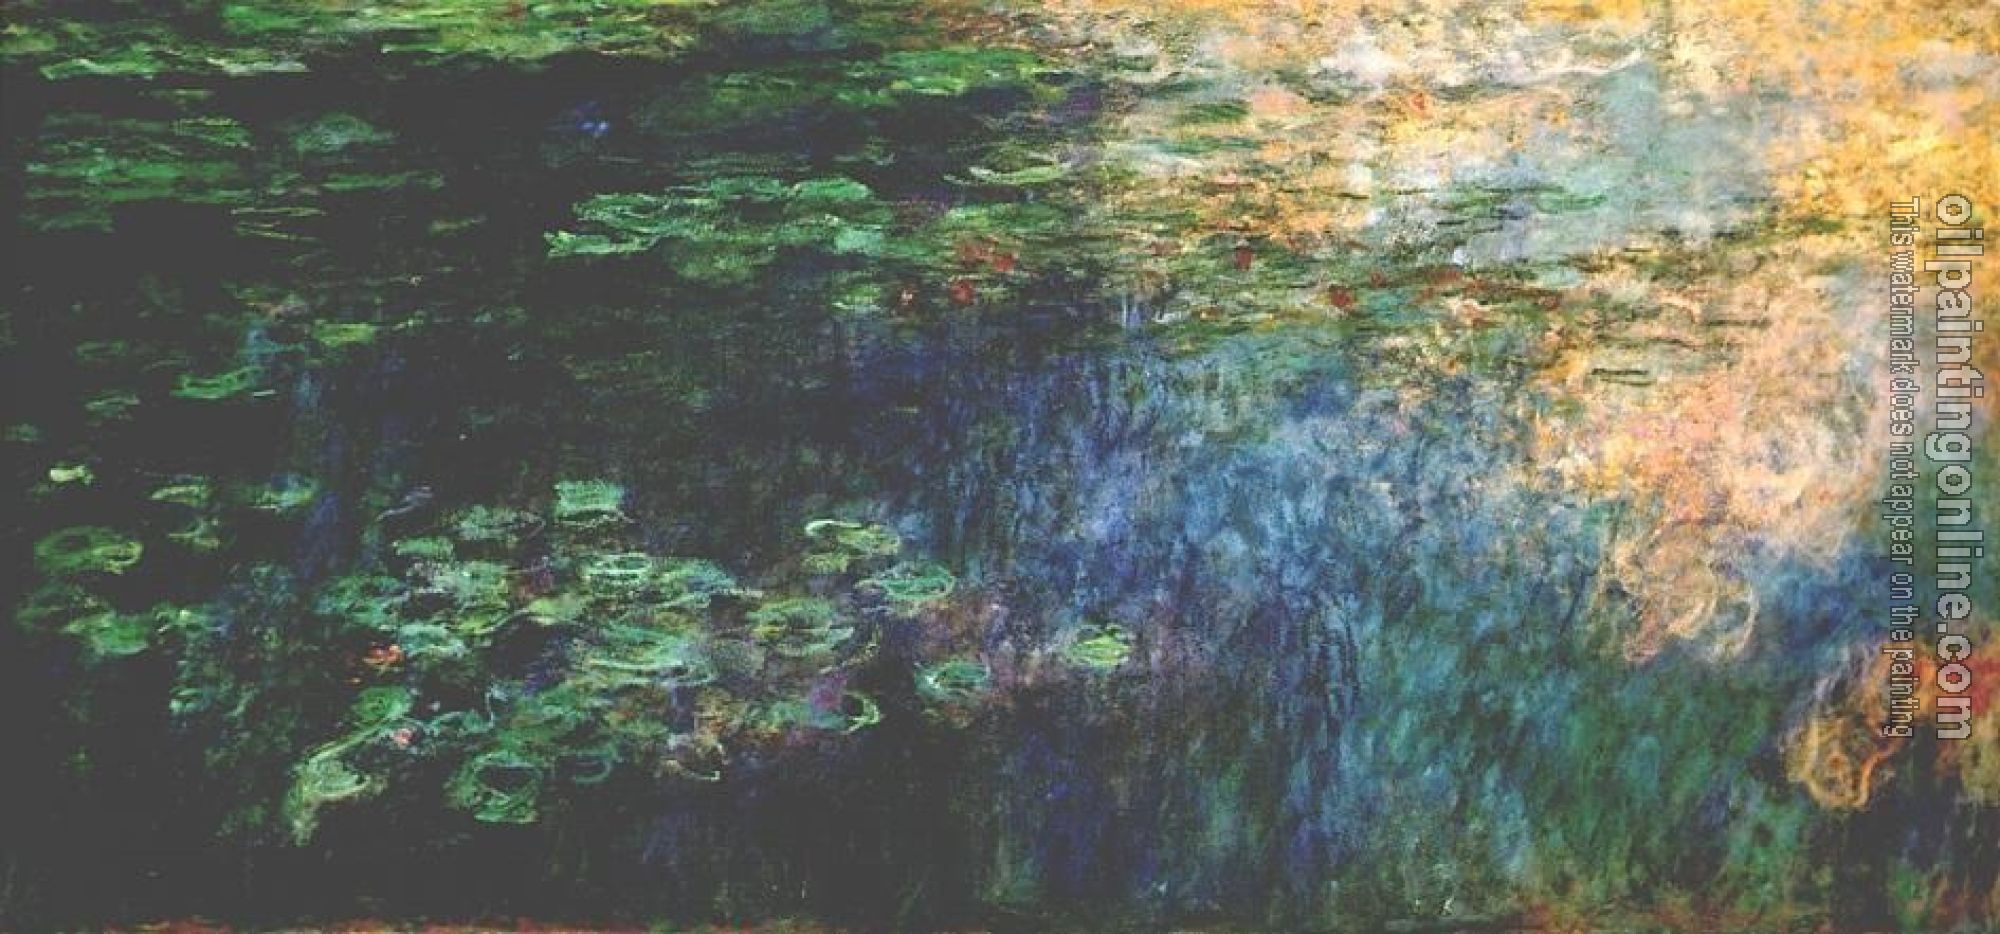 Monet, Claude Oscar - Reflections of Clouds on the Water-Lily Pond-Left Panel